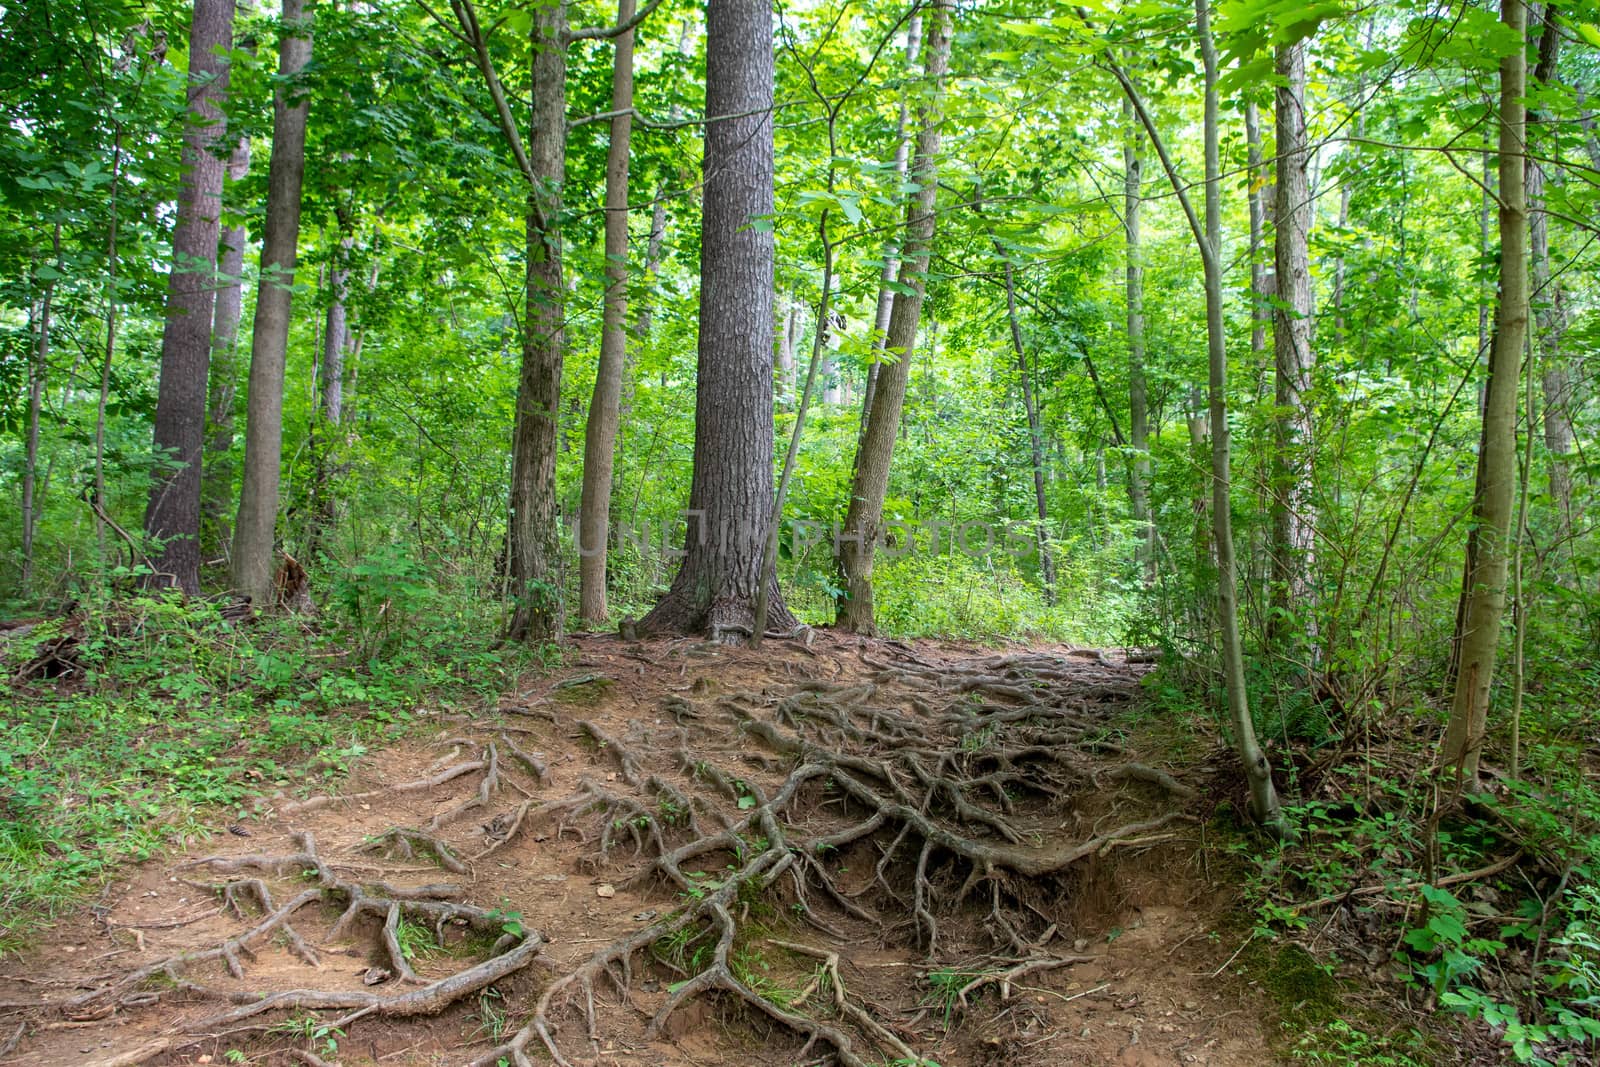 Tangled tree roots along enchanted forest path. by marysalen